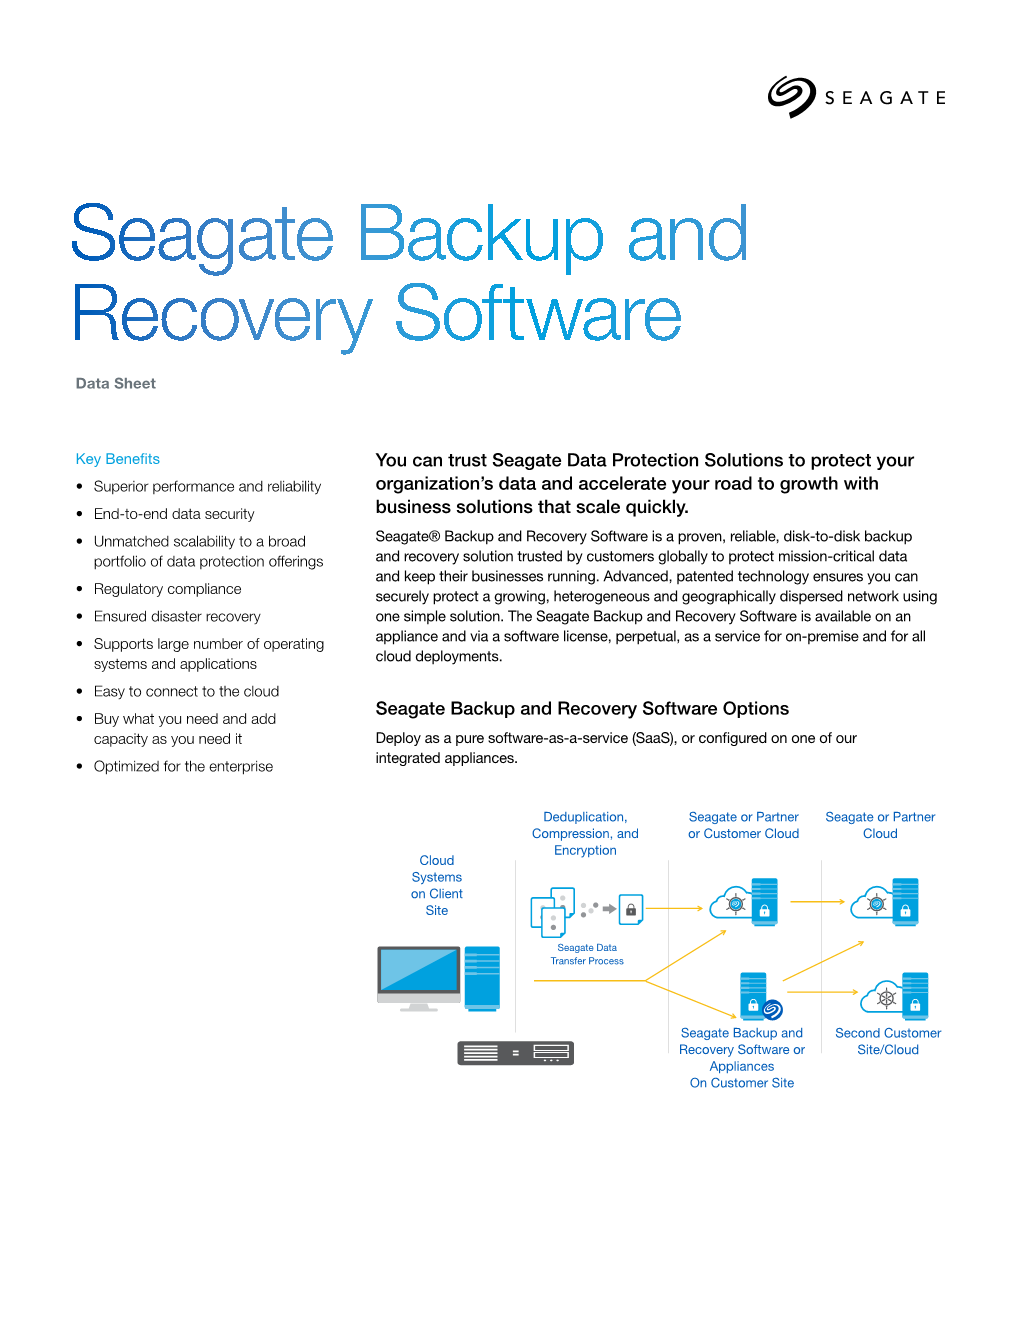 Seagate Backup and Recovery Software